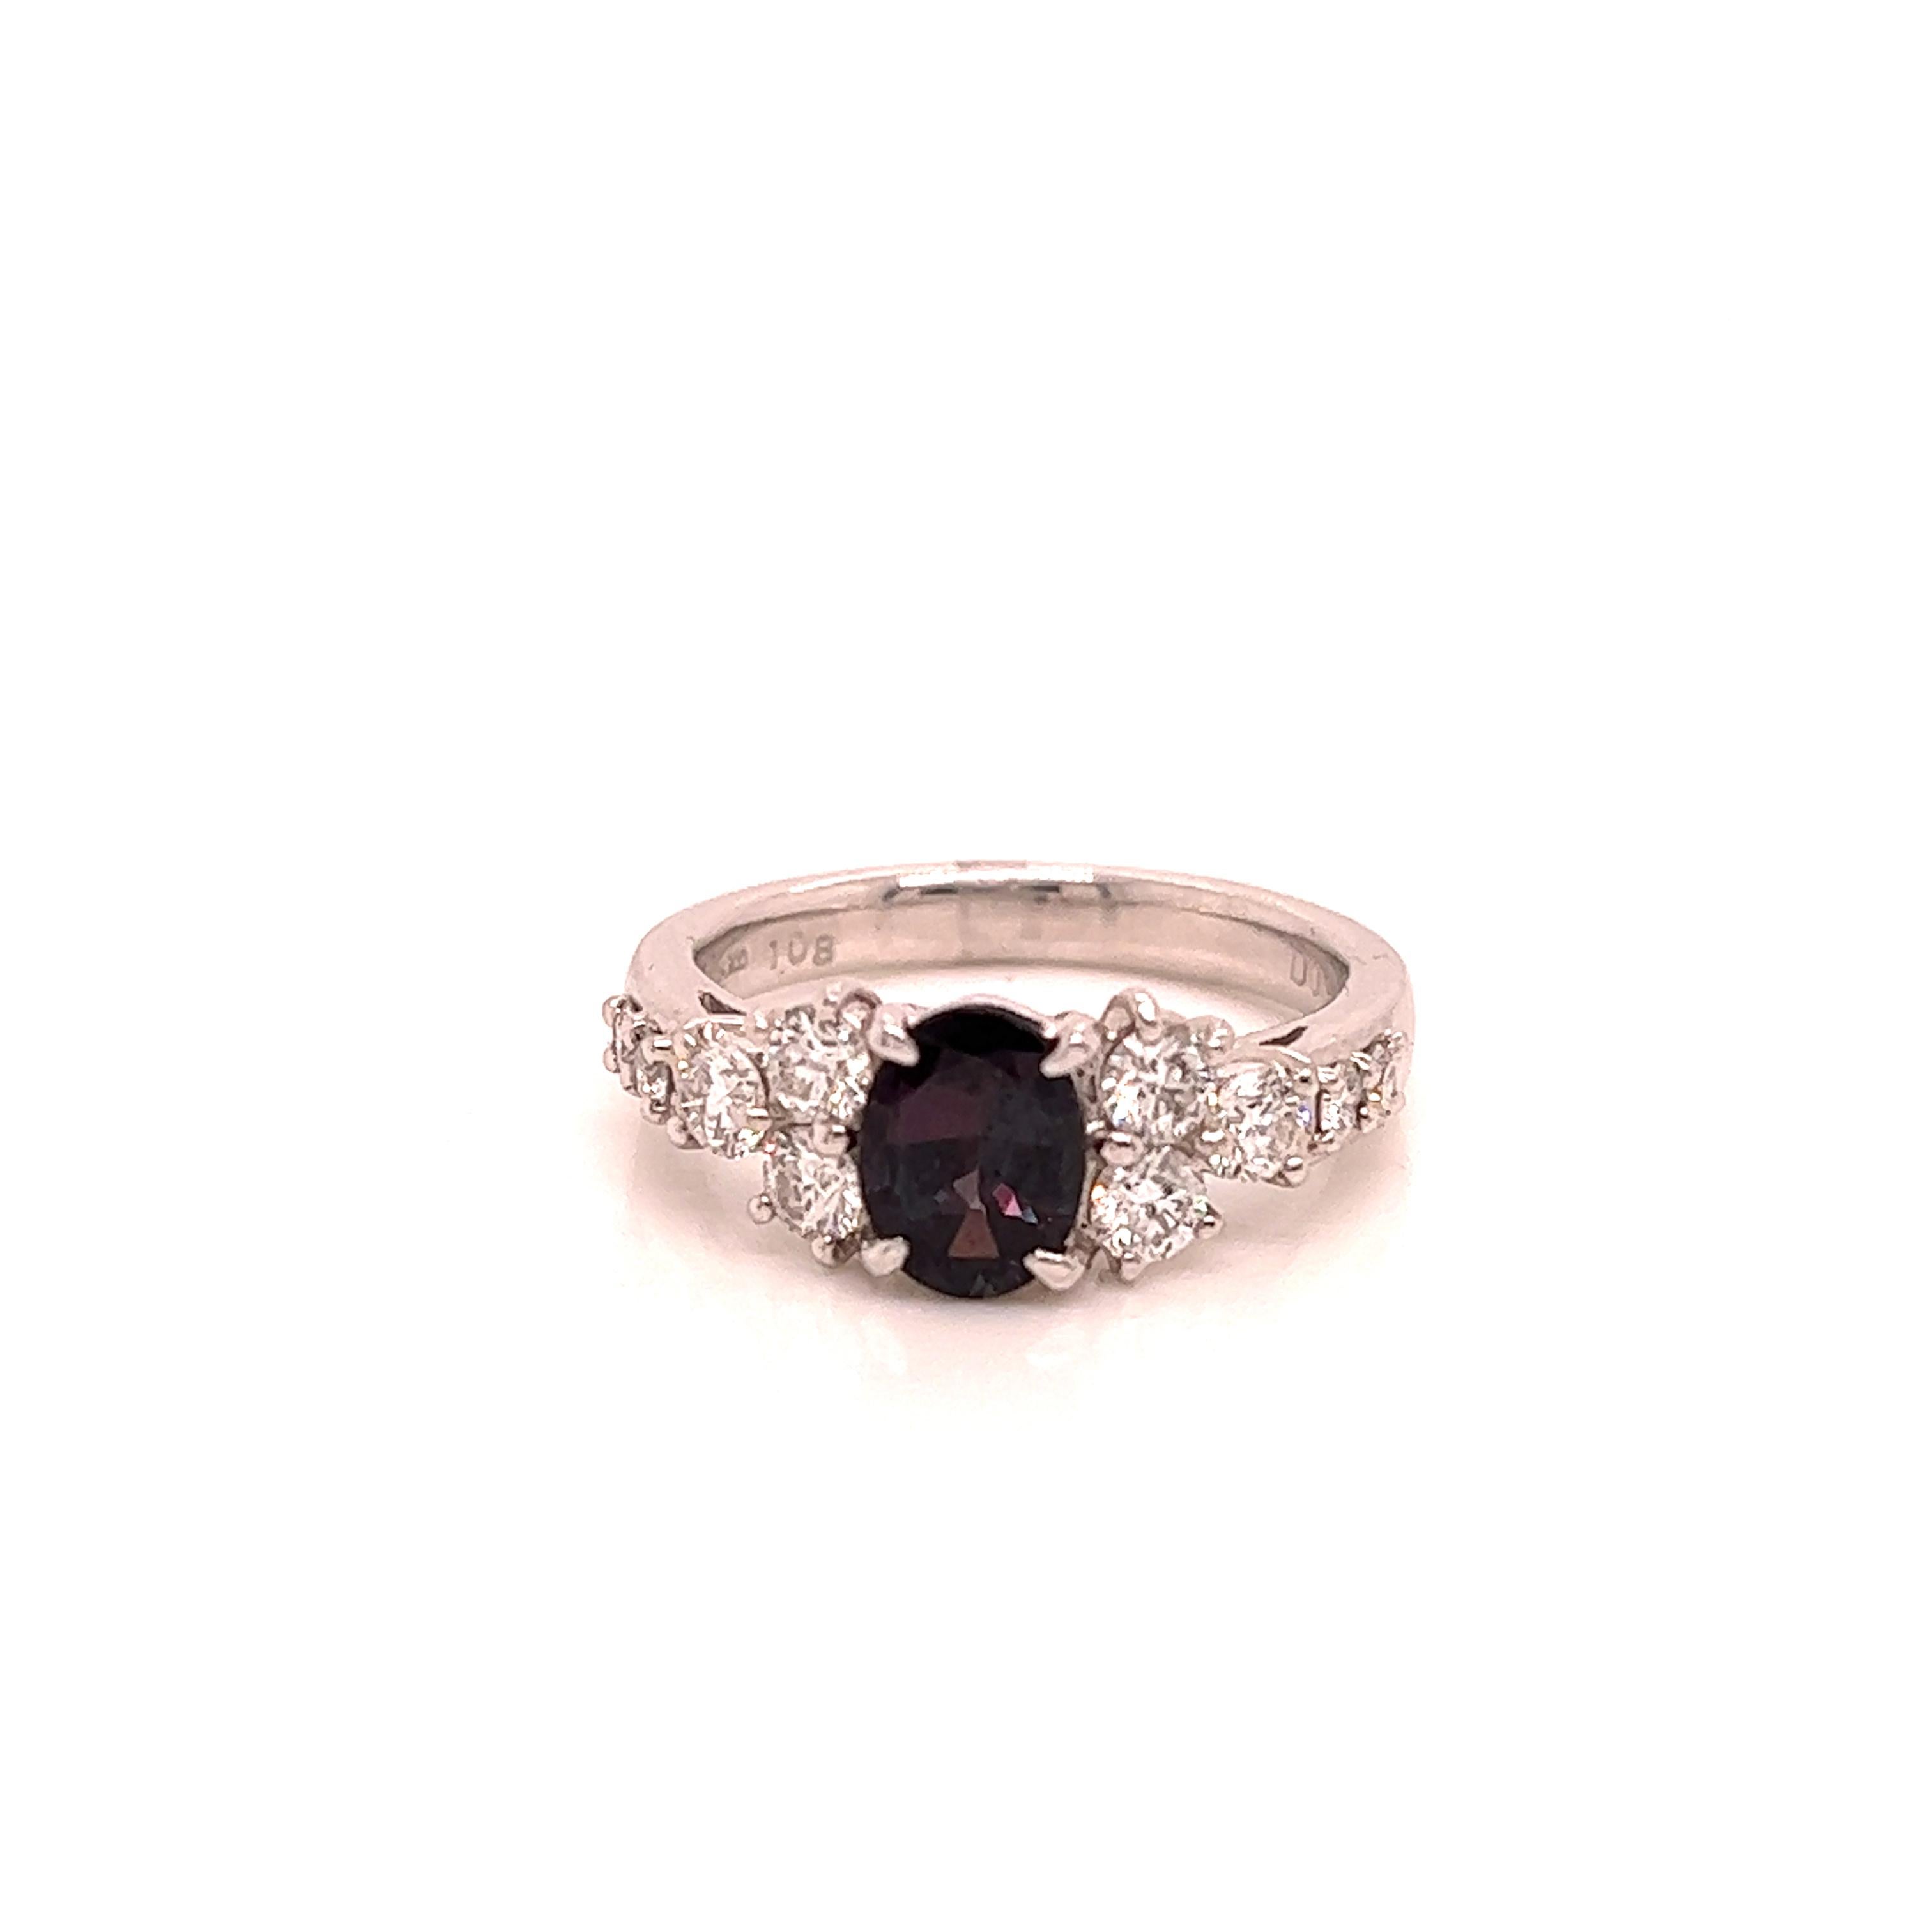 This is a gorgeous natural AAA quality oval Alexandrite surrounded by dainty diamonds that are set in a vintage platinum setting. This ring features a natural 1.08 oval alexandrite that is certified by the Gemological Institute of America (GIA) and